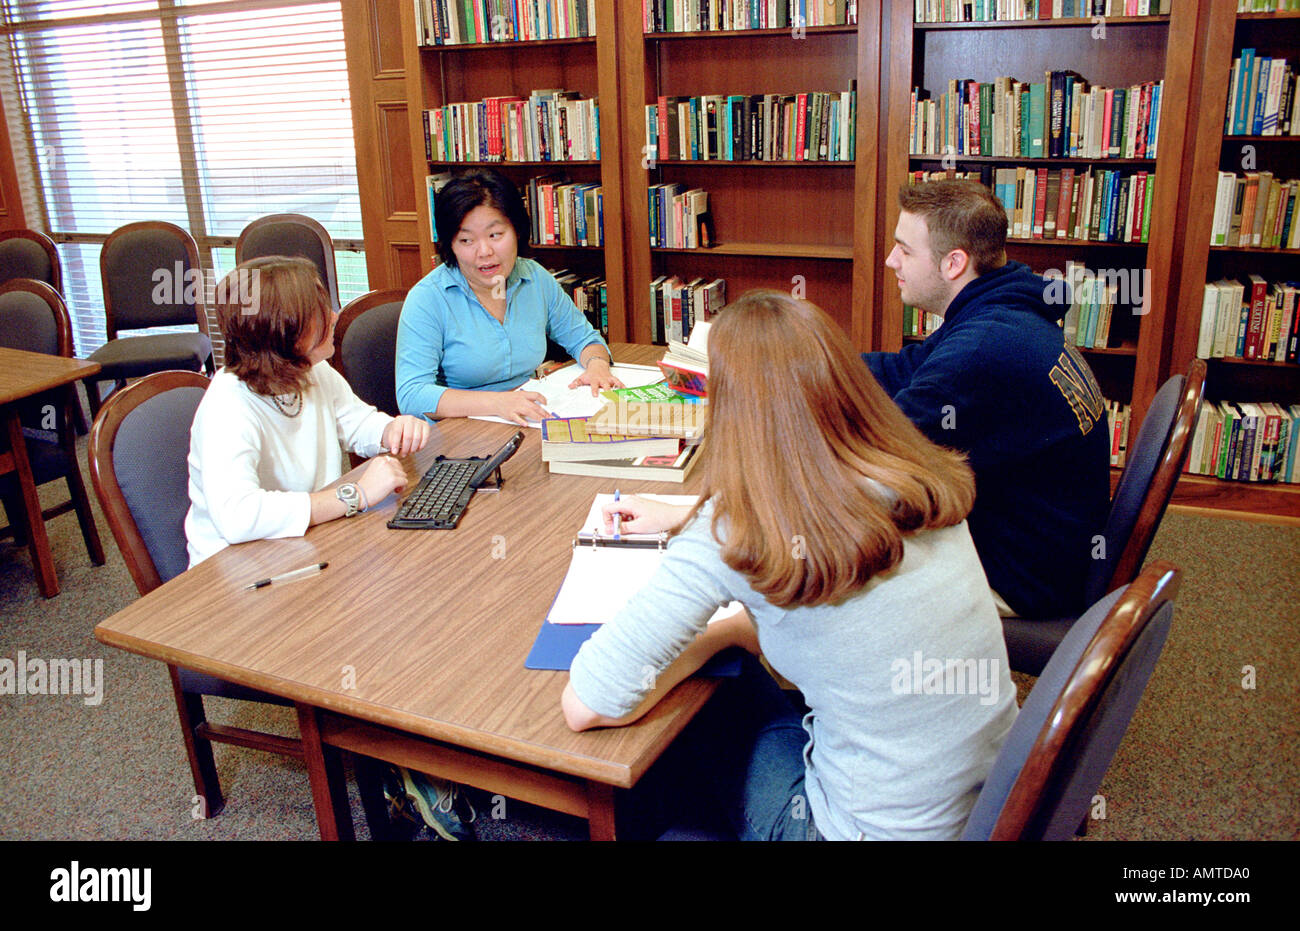 College students work in a group with professor on a research project involving team work Stock Photo